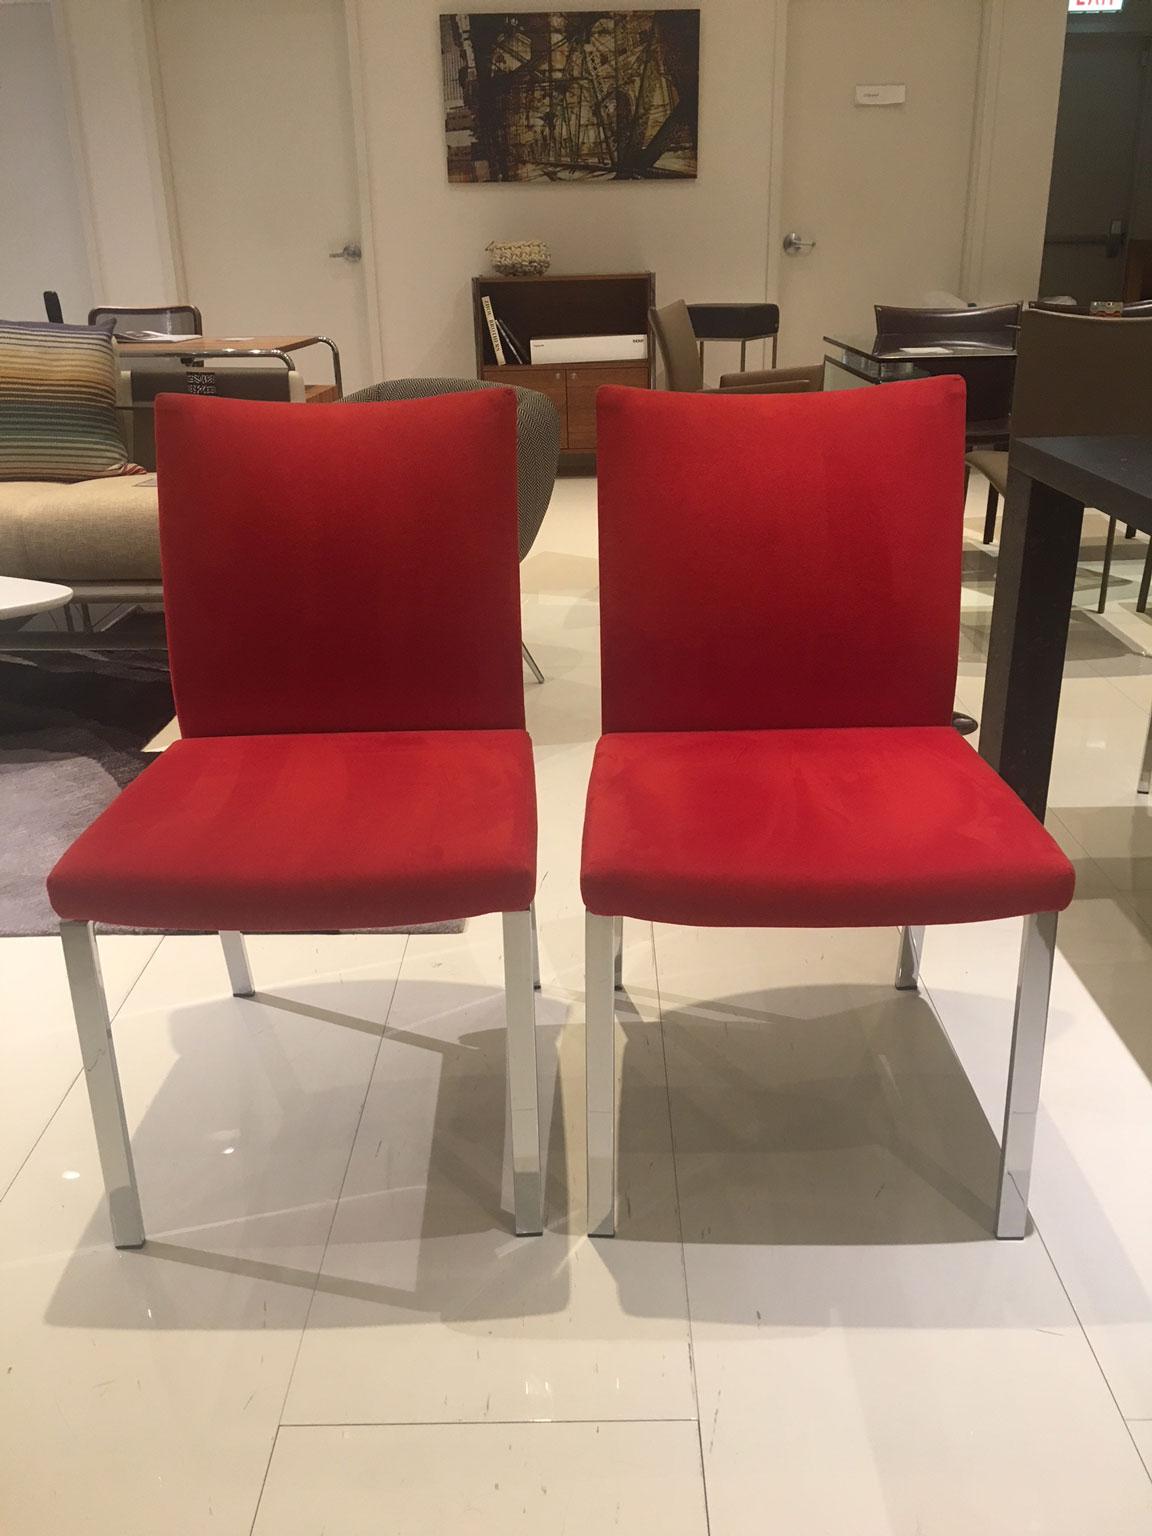 Design Georg Appeltshauser 2004

Linus & linus function:

A chair with a frame made of steel in polished chrome. For the cover 2 high-quality leather collections with a total of 77 colors are available. Backrest available in 2 heights.

Set of